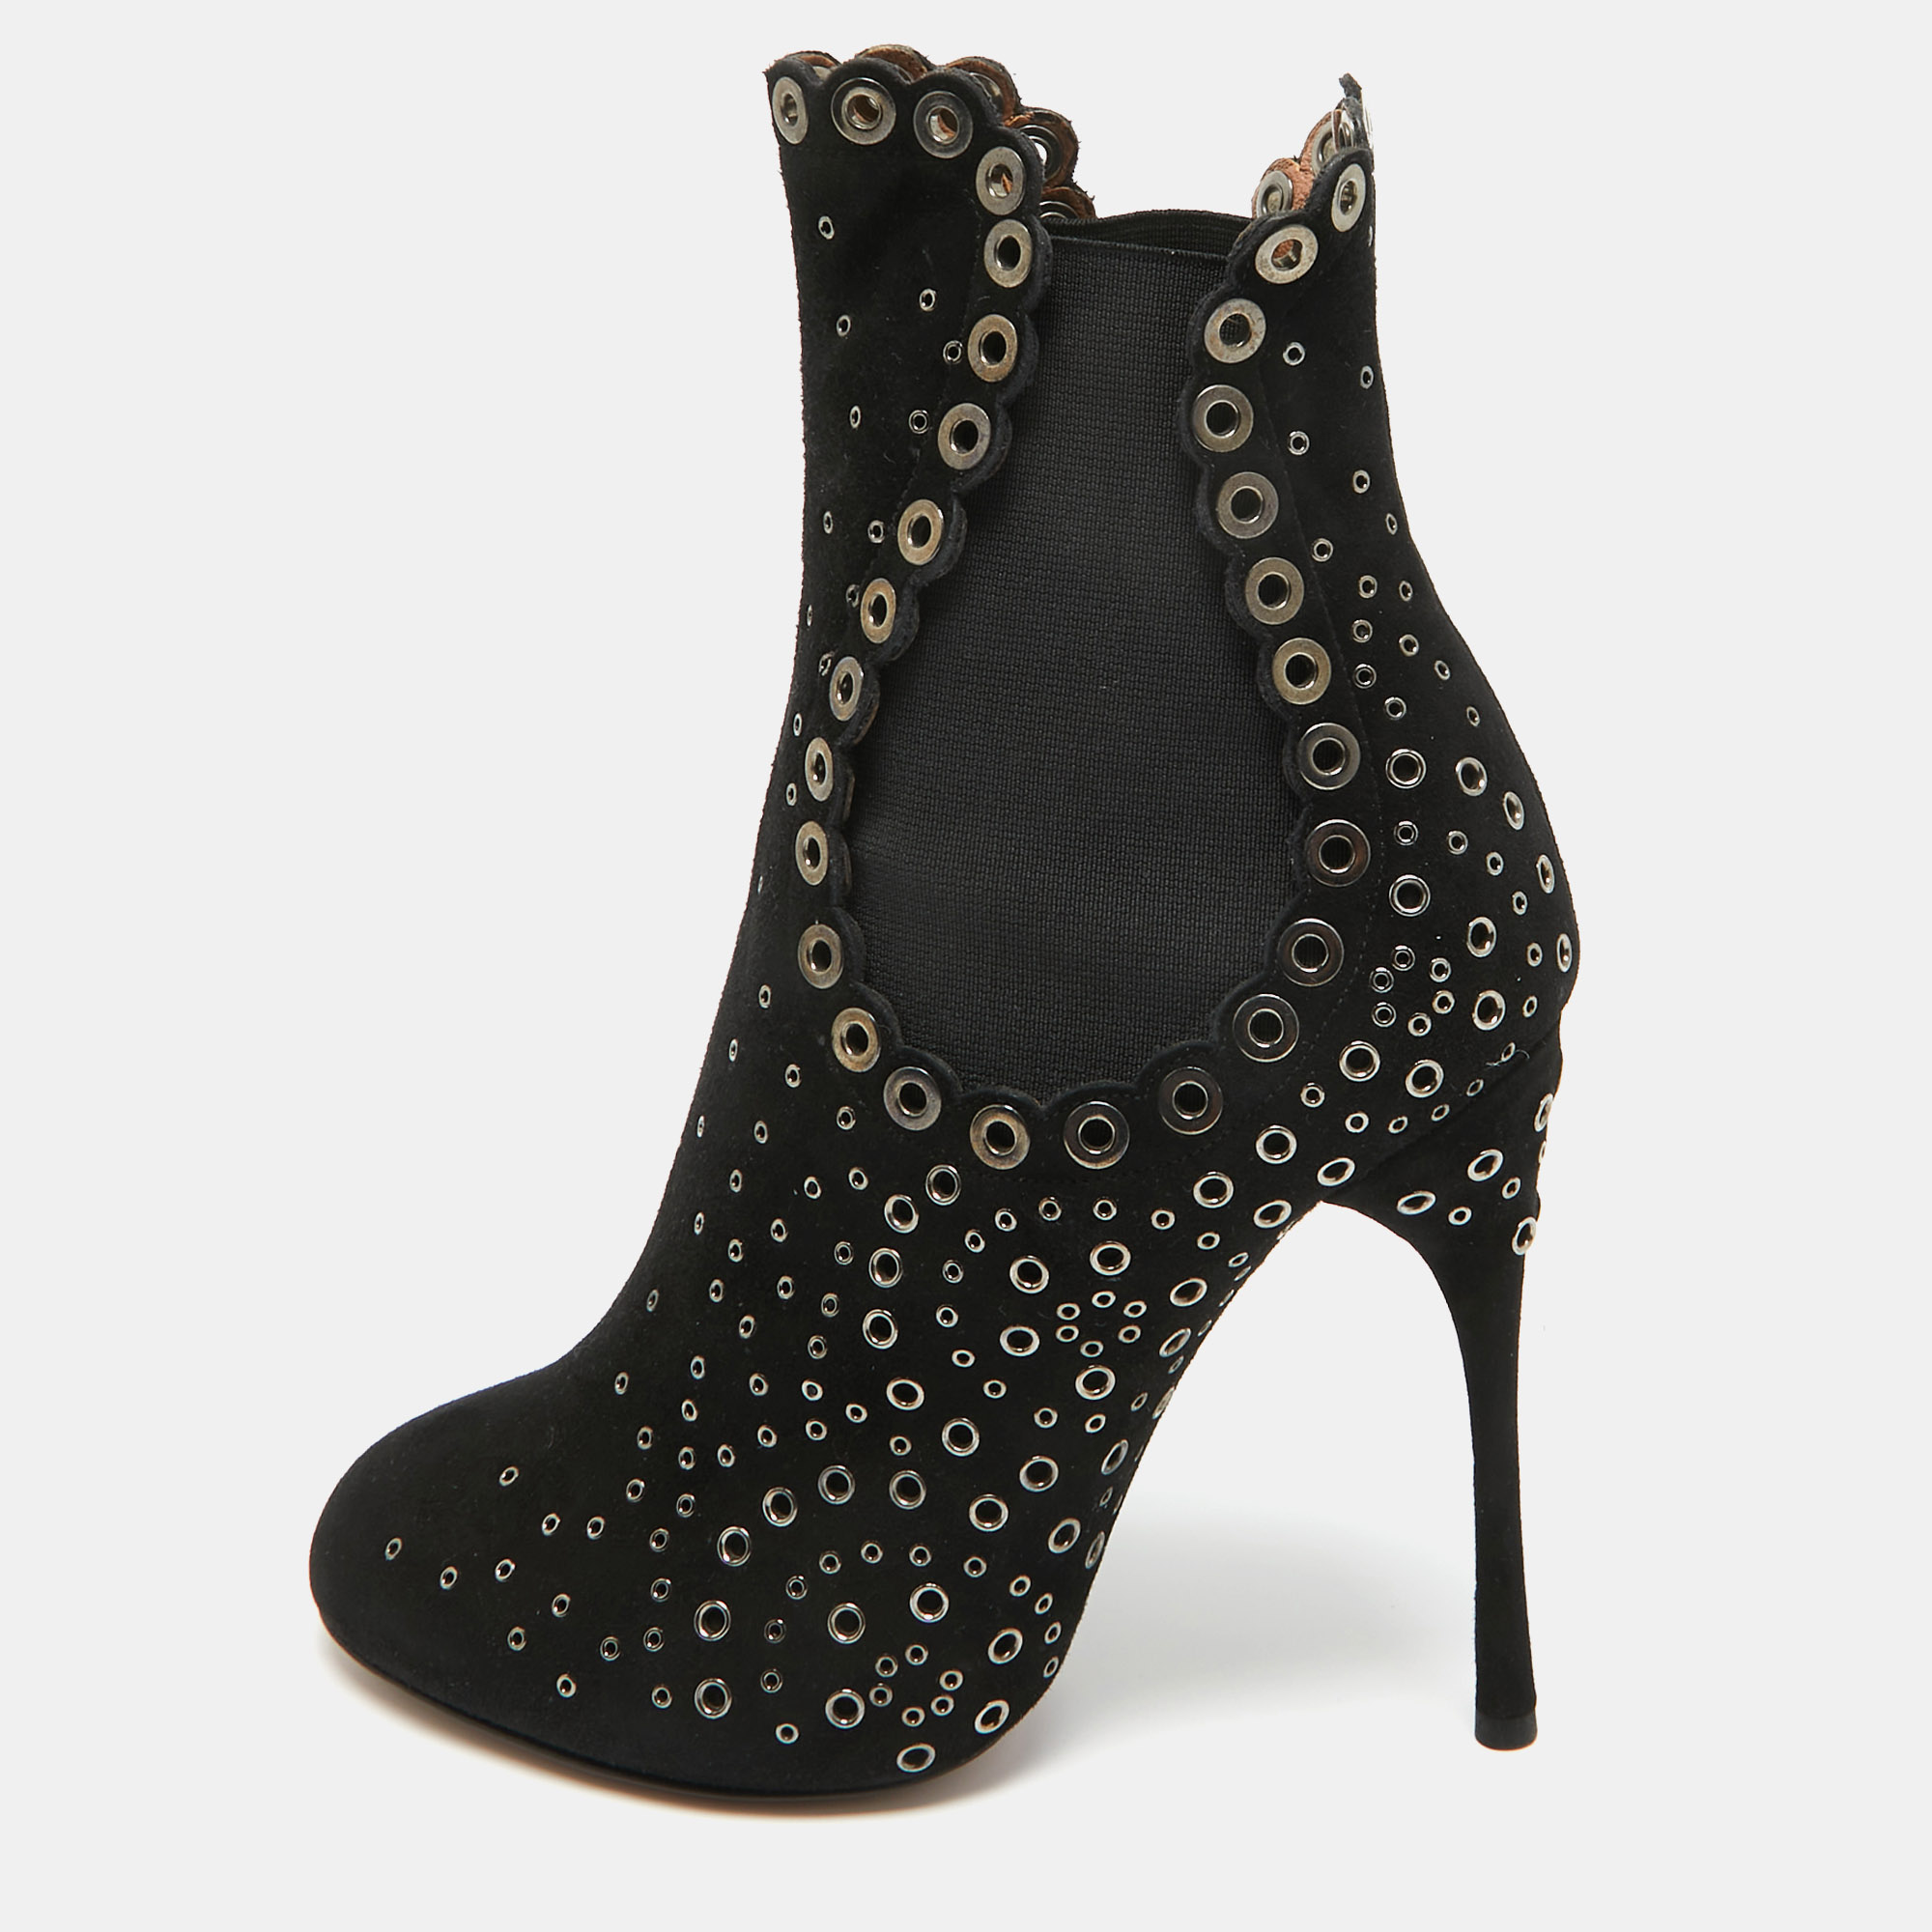 Alaia black suede studded ankle boots size 38